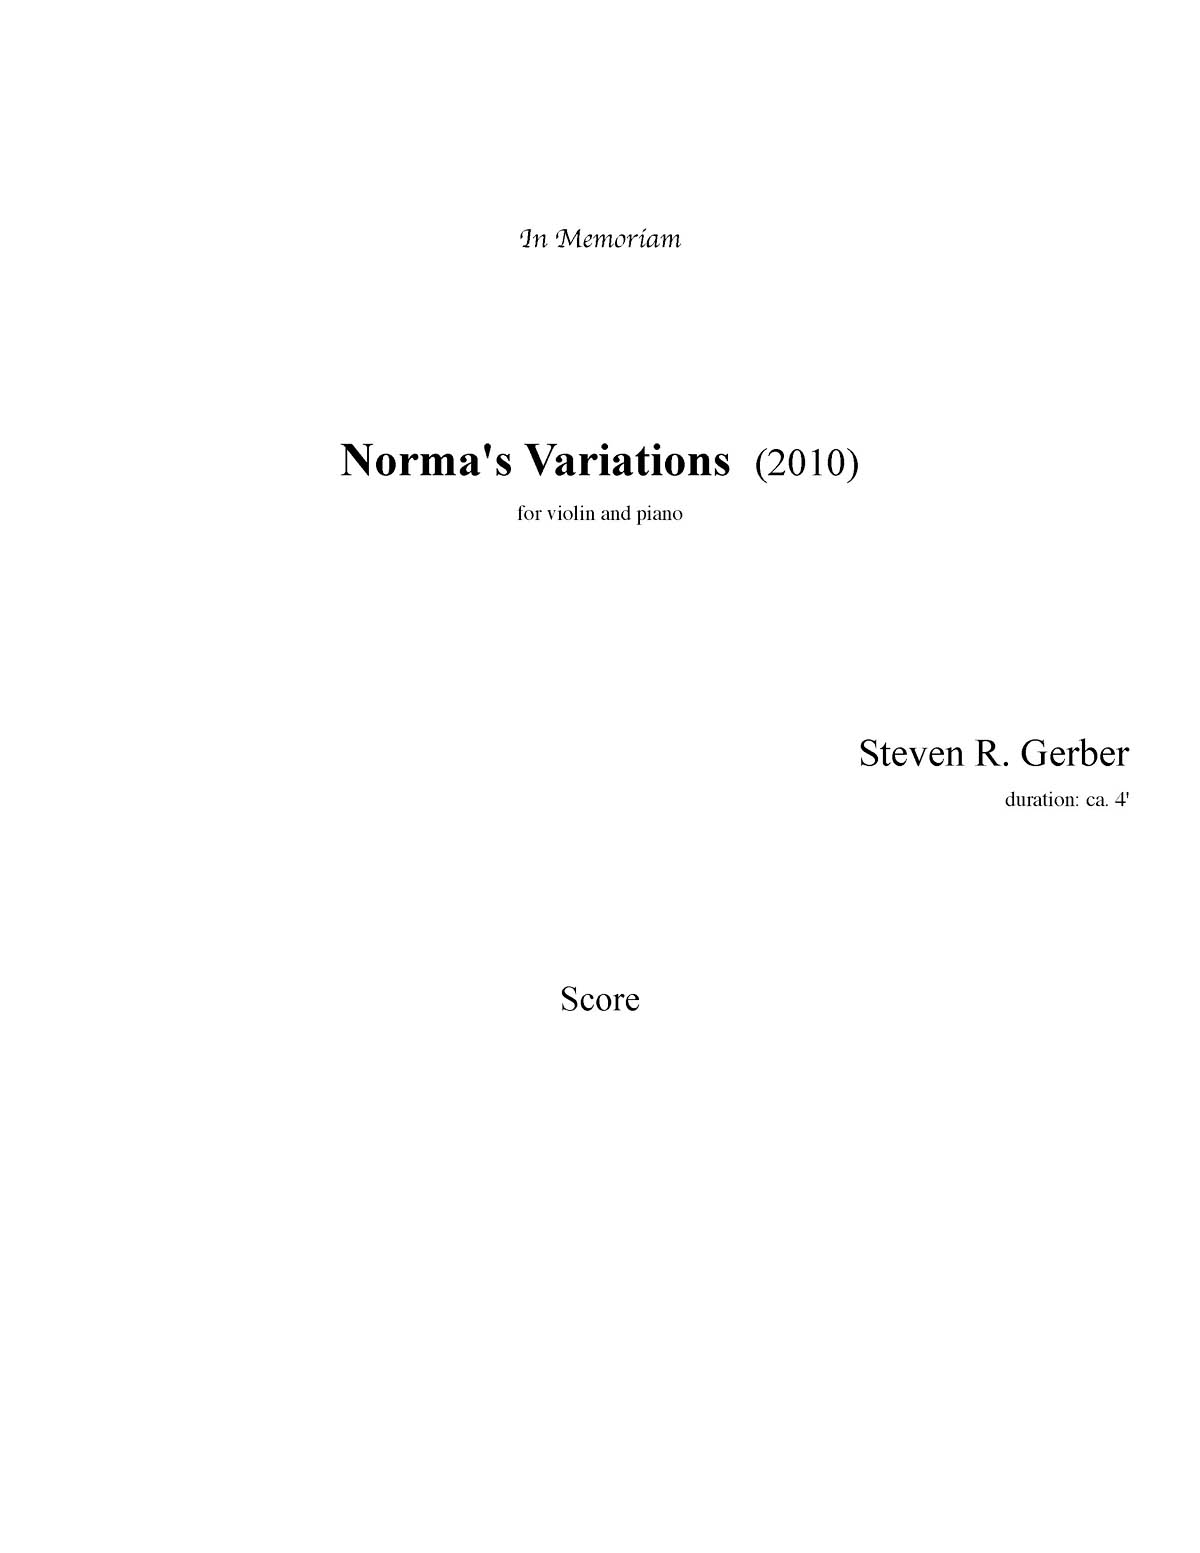 Steven R. Gerber: Norma's Variations for Violin and Piano: Violin and Accomp.: